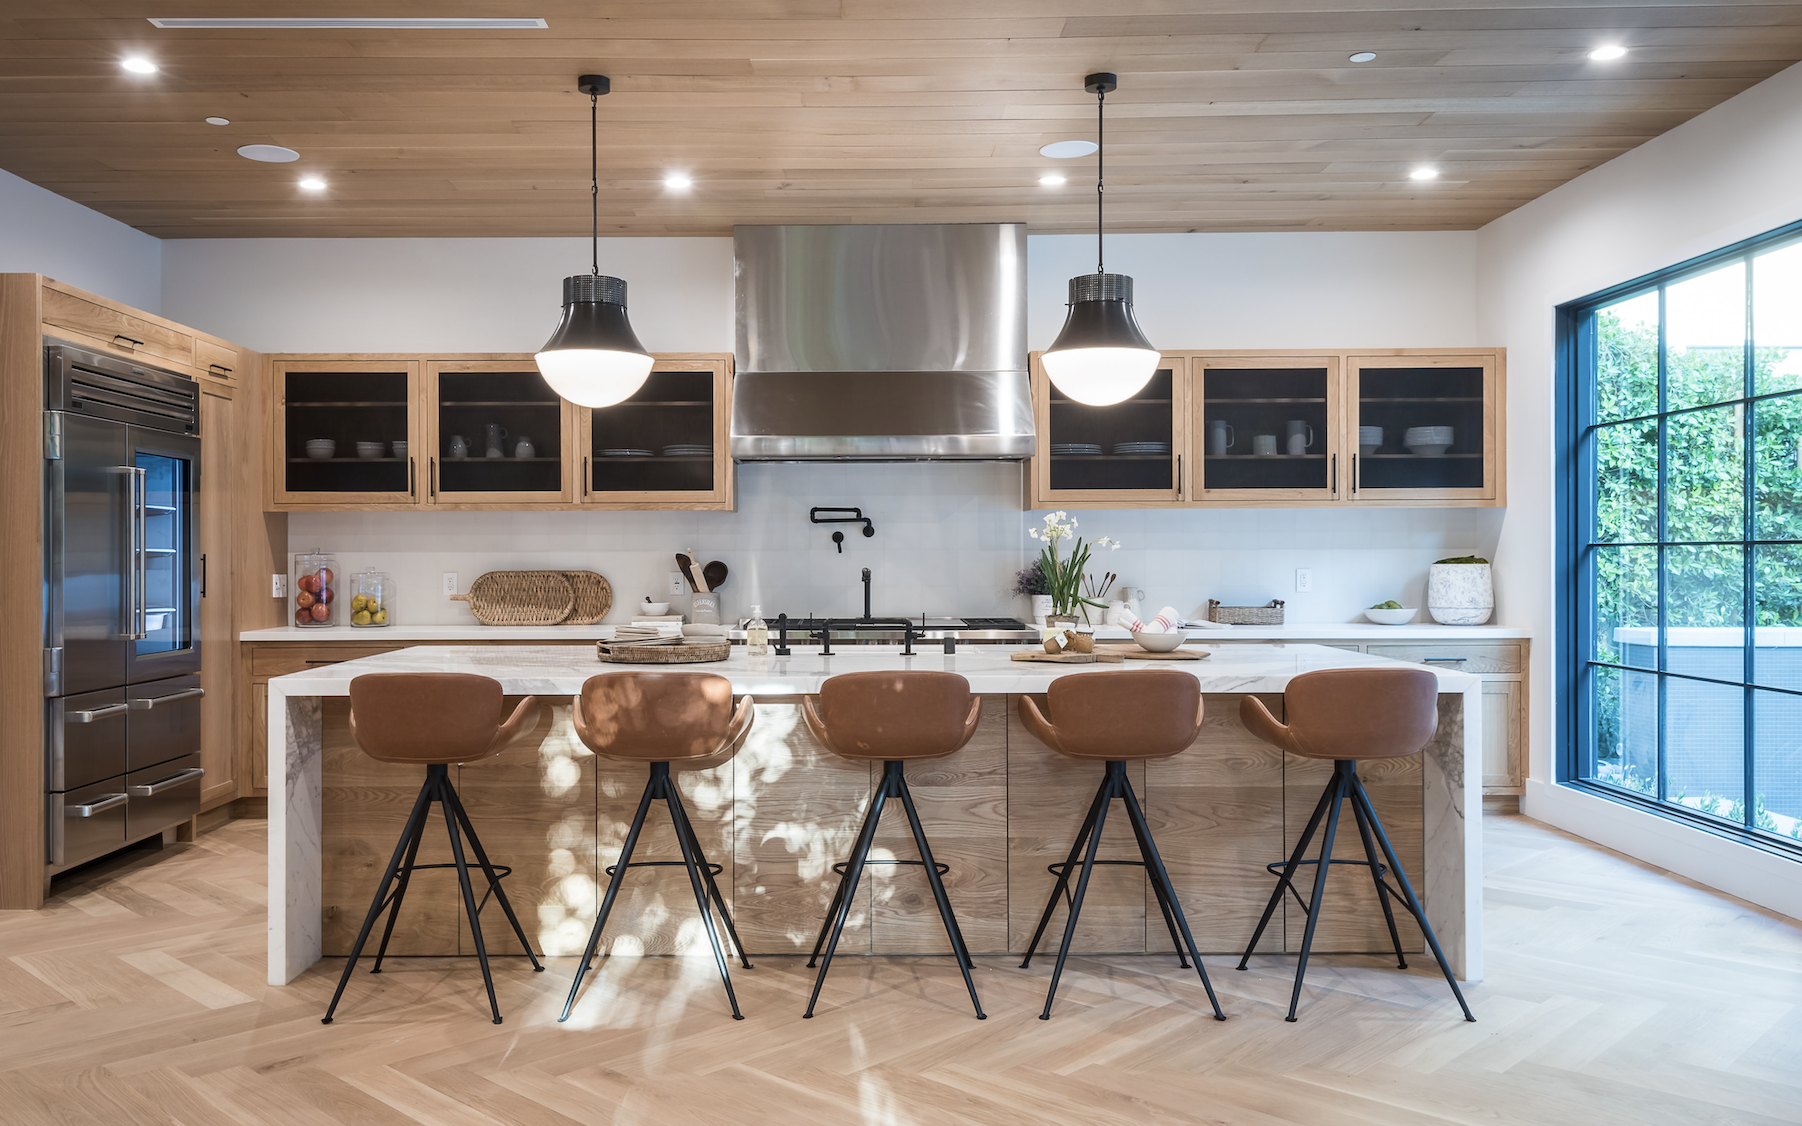 How to Correctly Design and Build a Kitchen